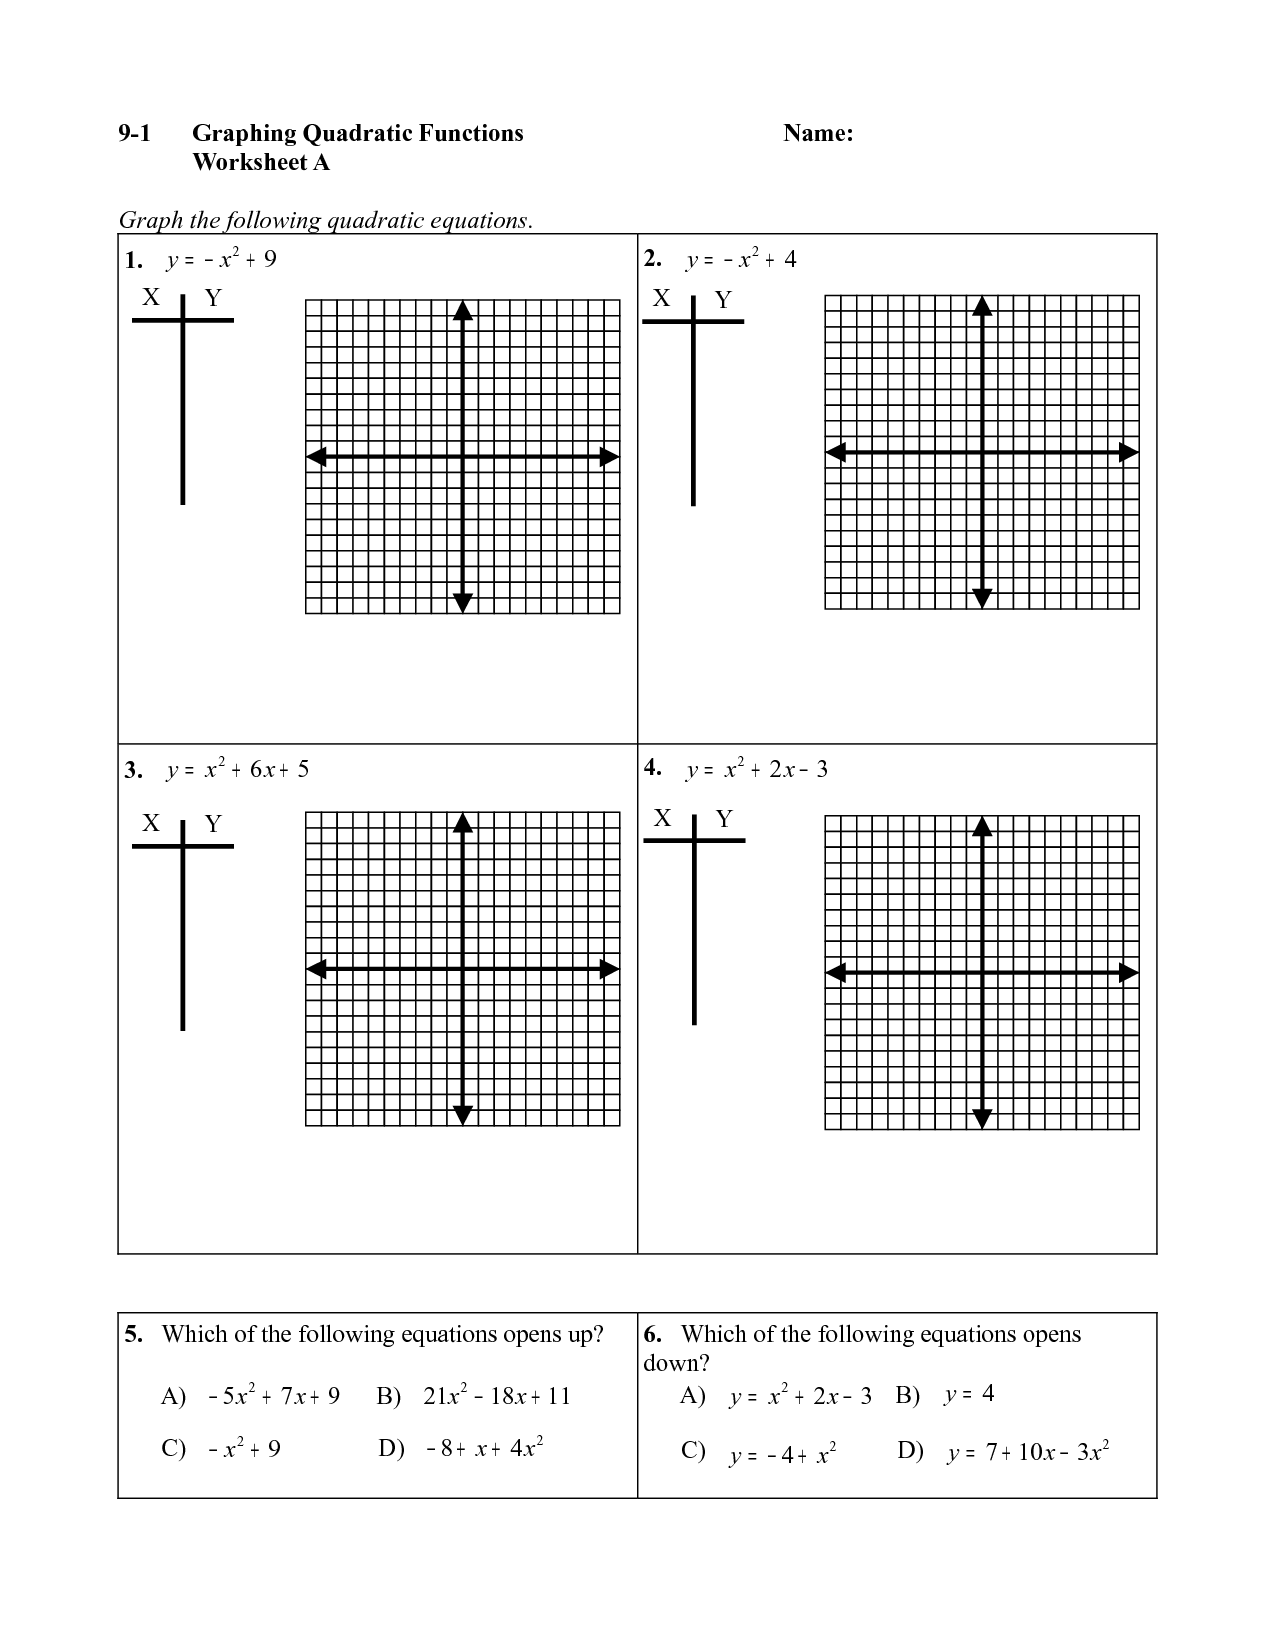 Graphing Quadratic Functions Worksheet Image